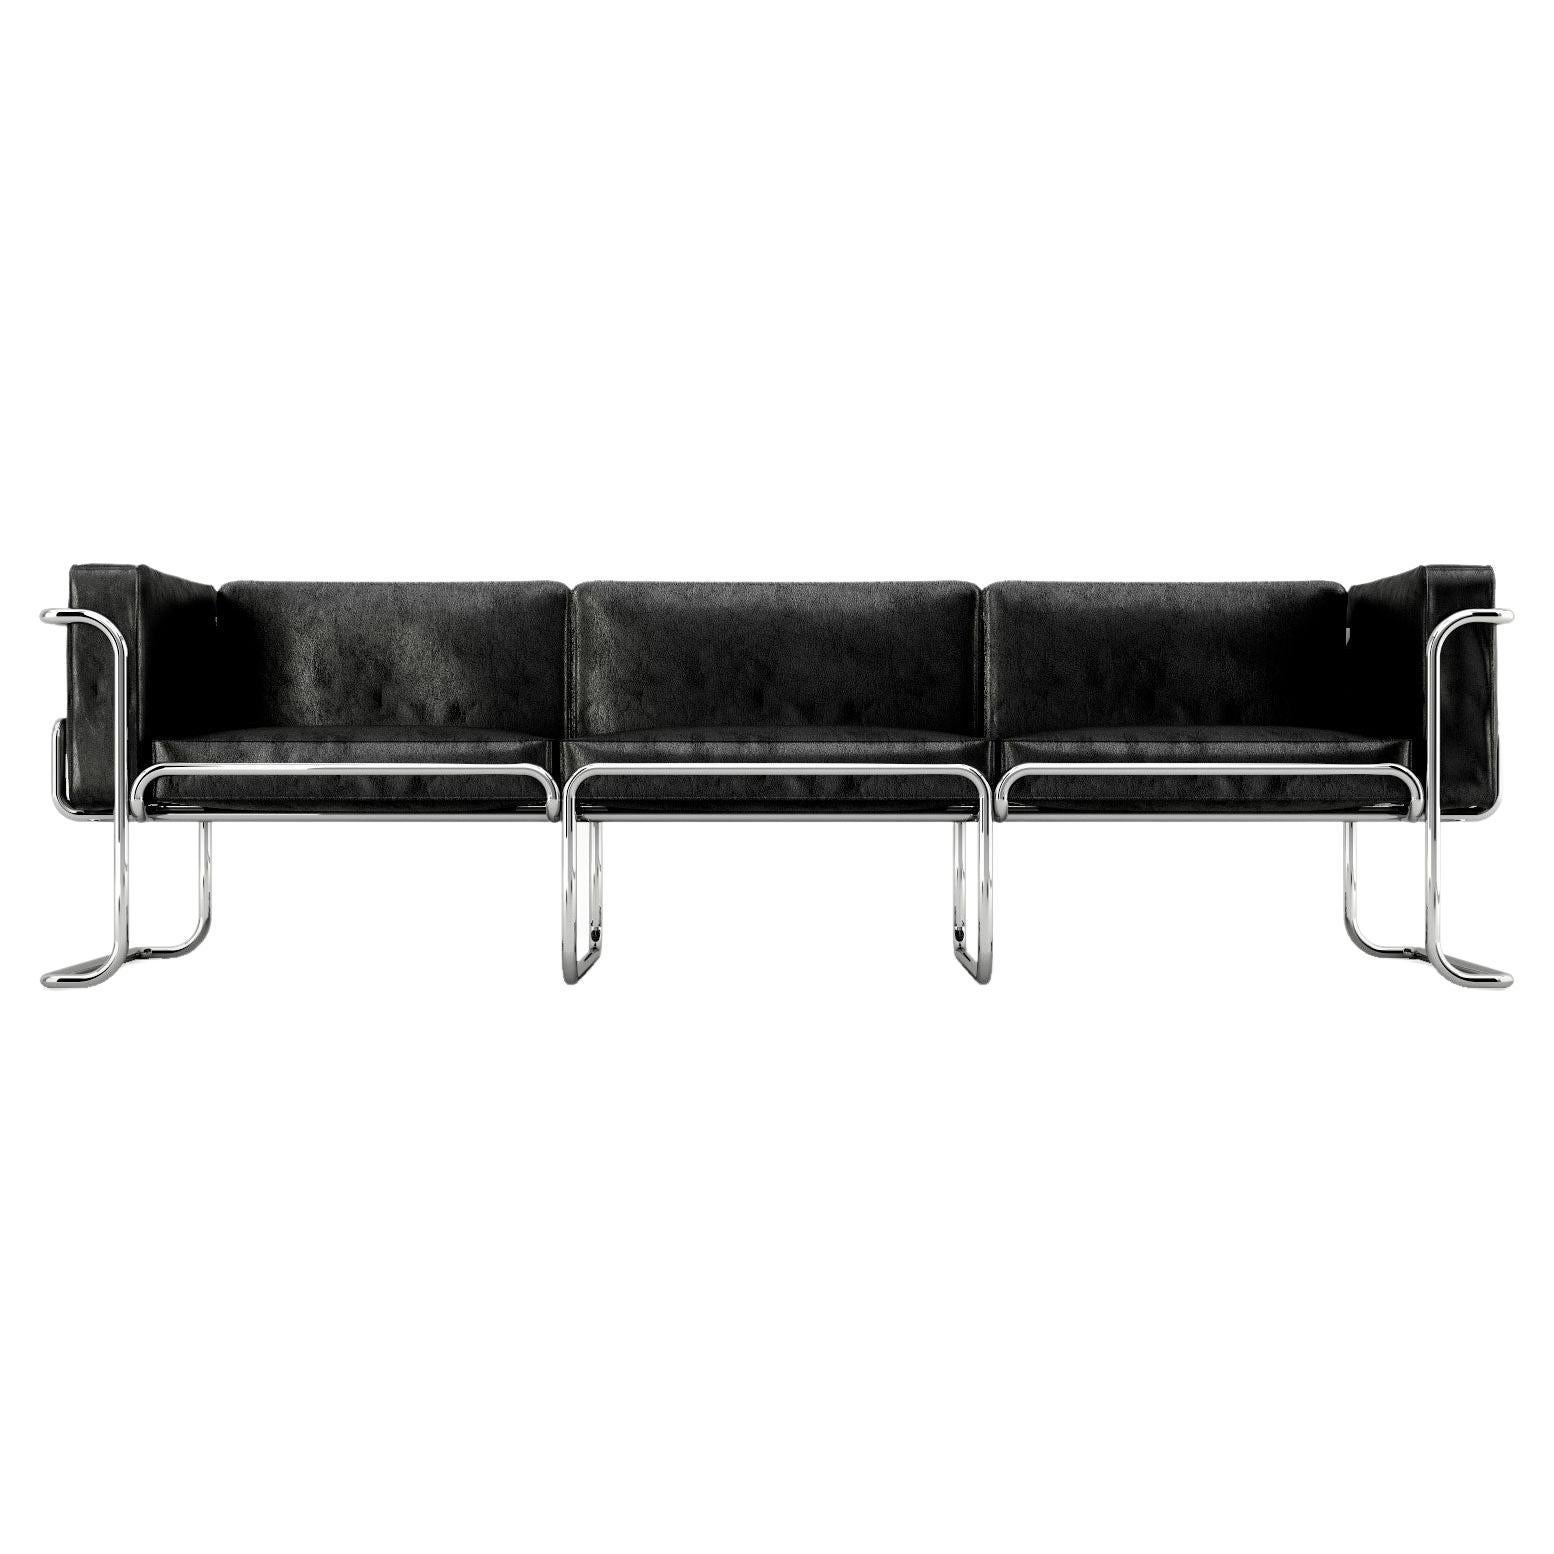 Lotus 3 Seat Sofa - Modern Black Leather Sofa with Stainless Steel Legs For Sale